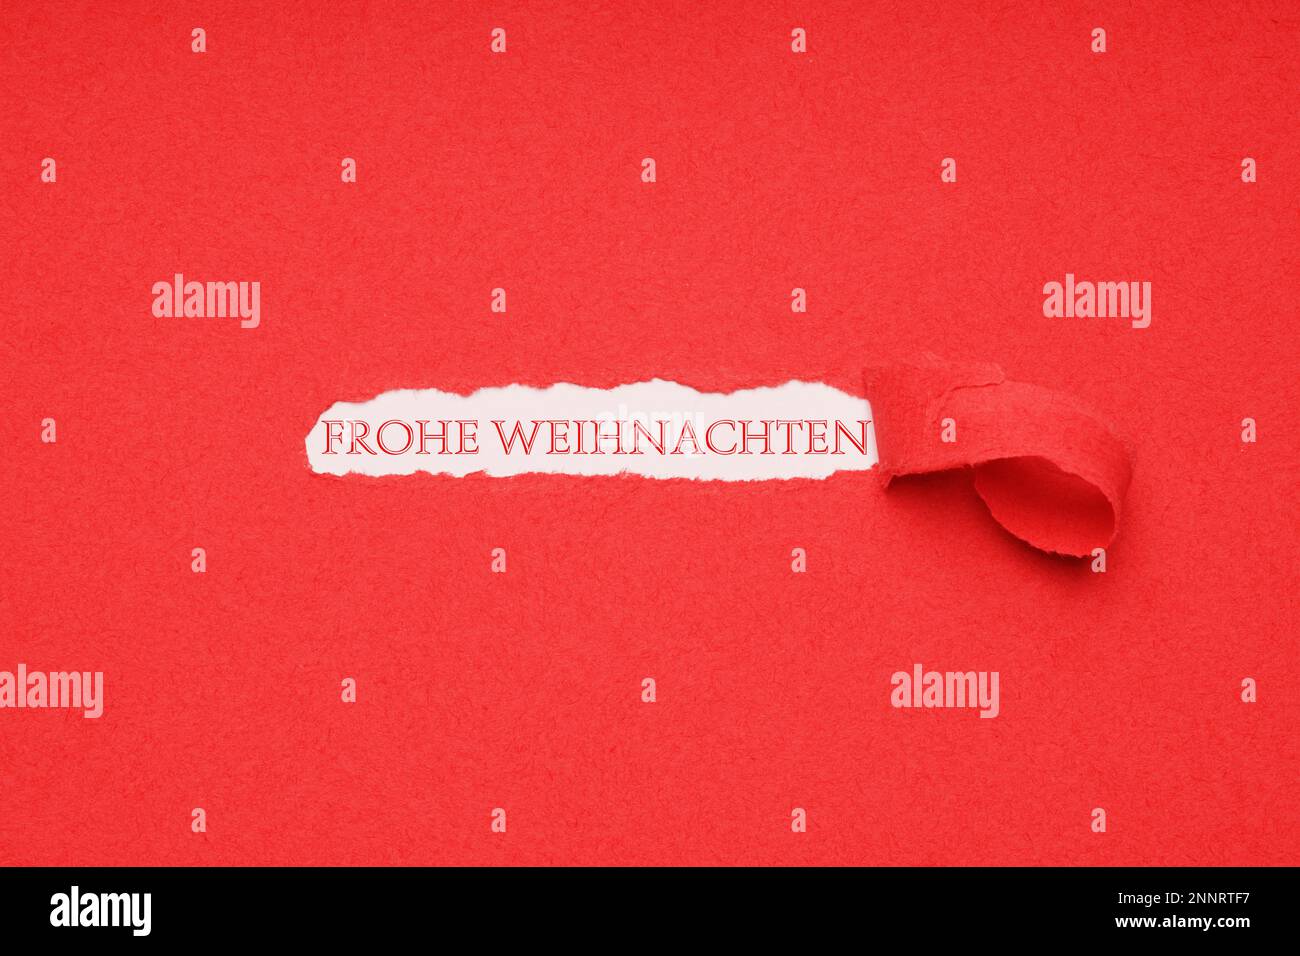 Frohe Weihnachten is German for merry christmas - xmas greeting seen through hole peeled in red paper background Stock Photo